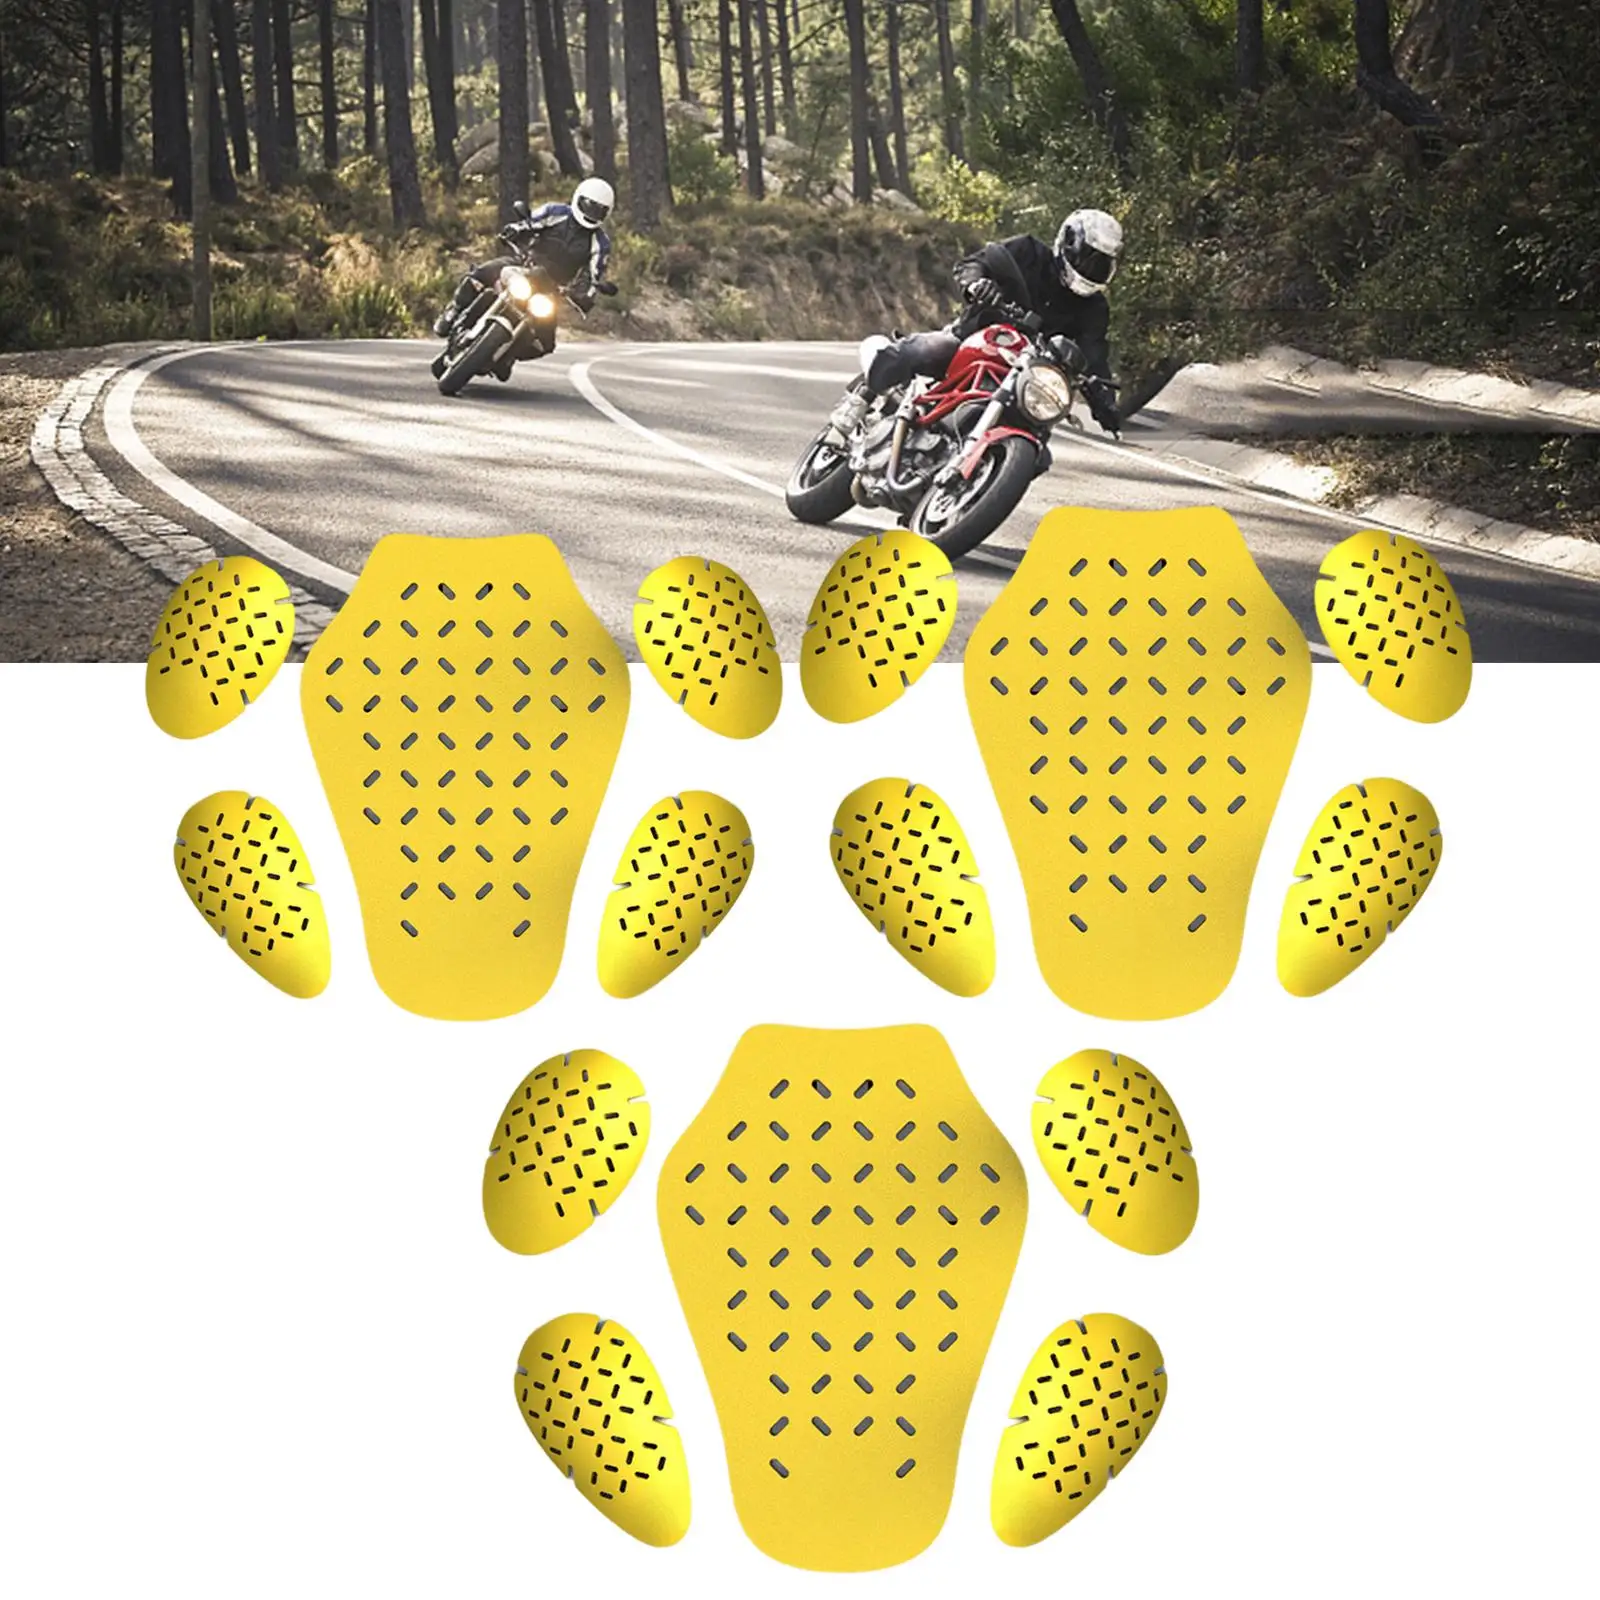 5Pcs Motorbike Insert Armor Pads Lightweight EVA Armor Protection Pad for Motorcycle Street Biker Jackets Cycling Riding